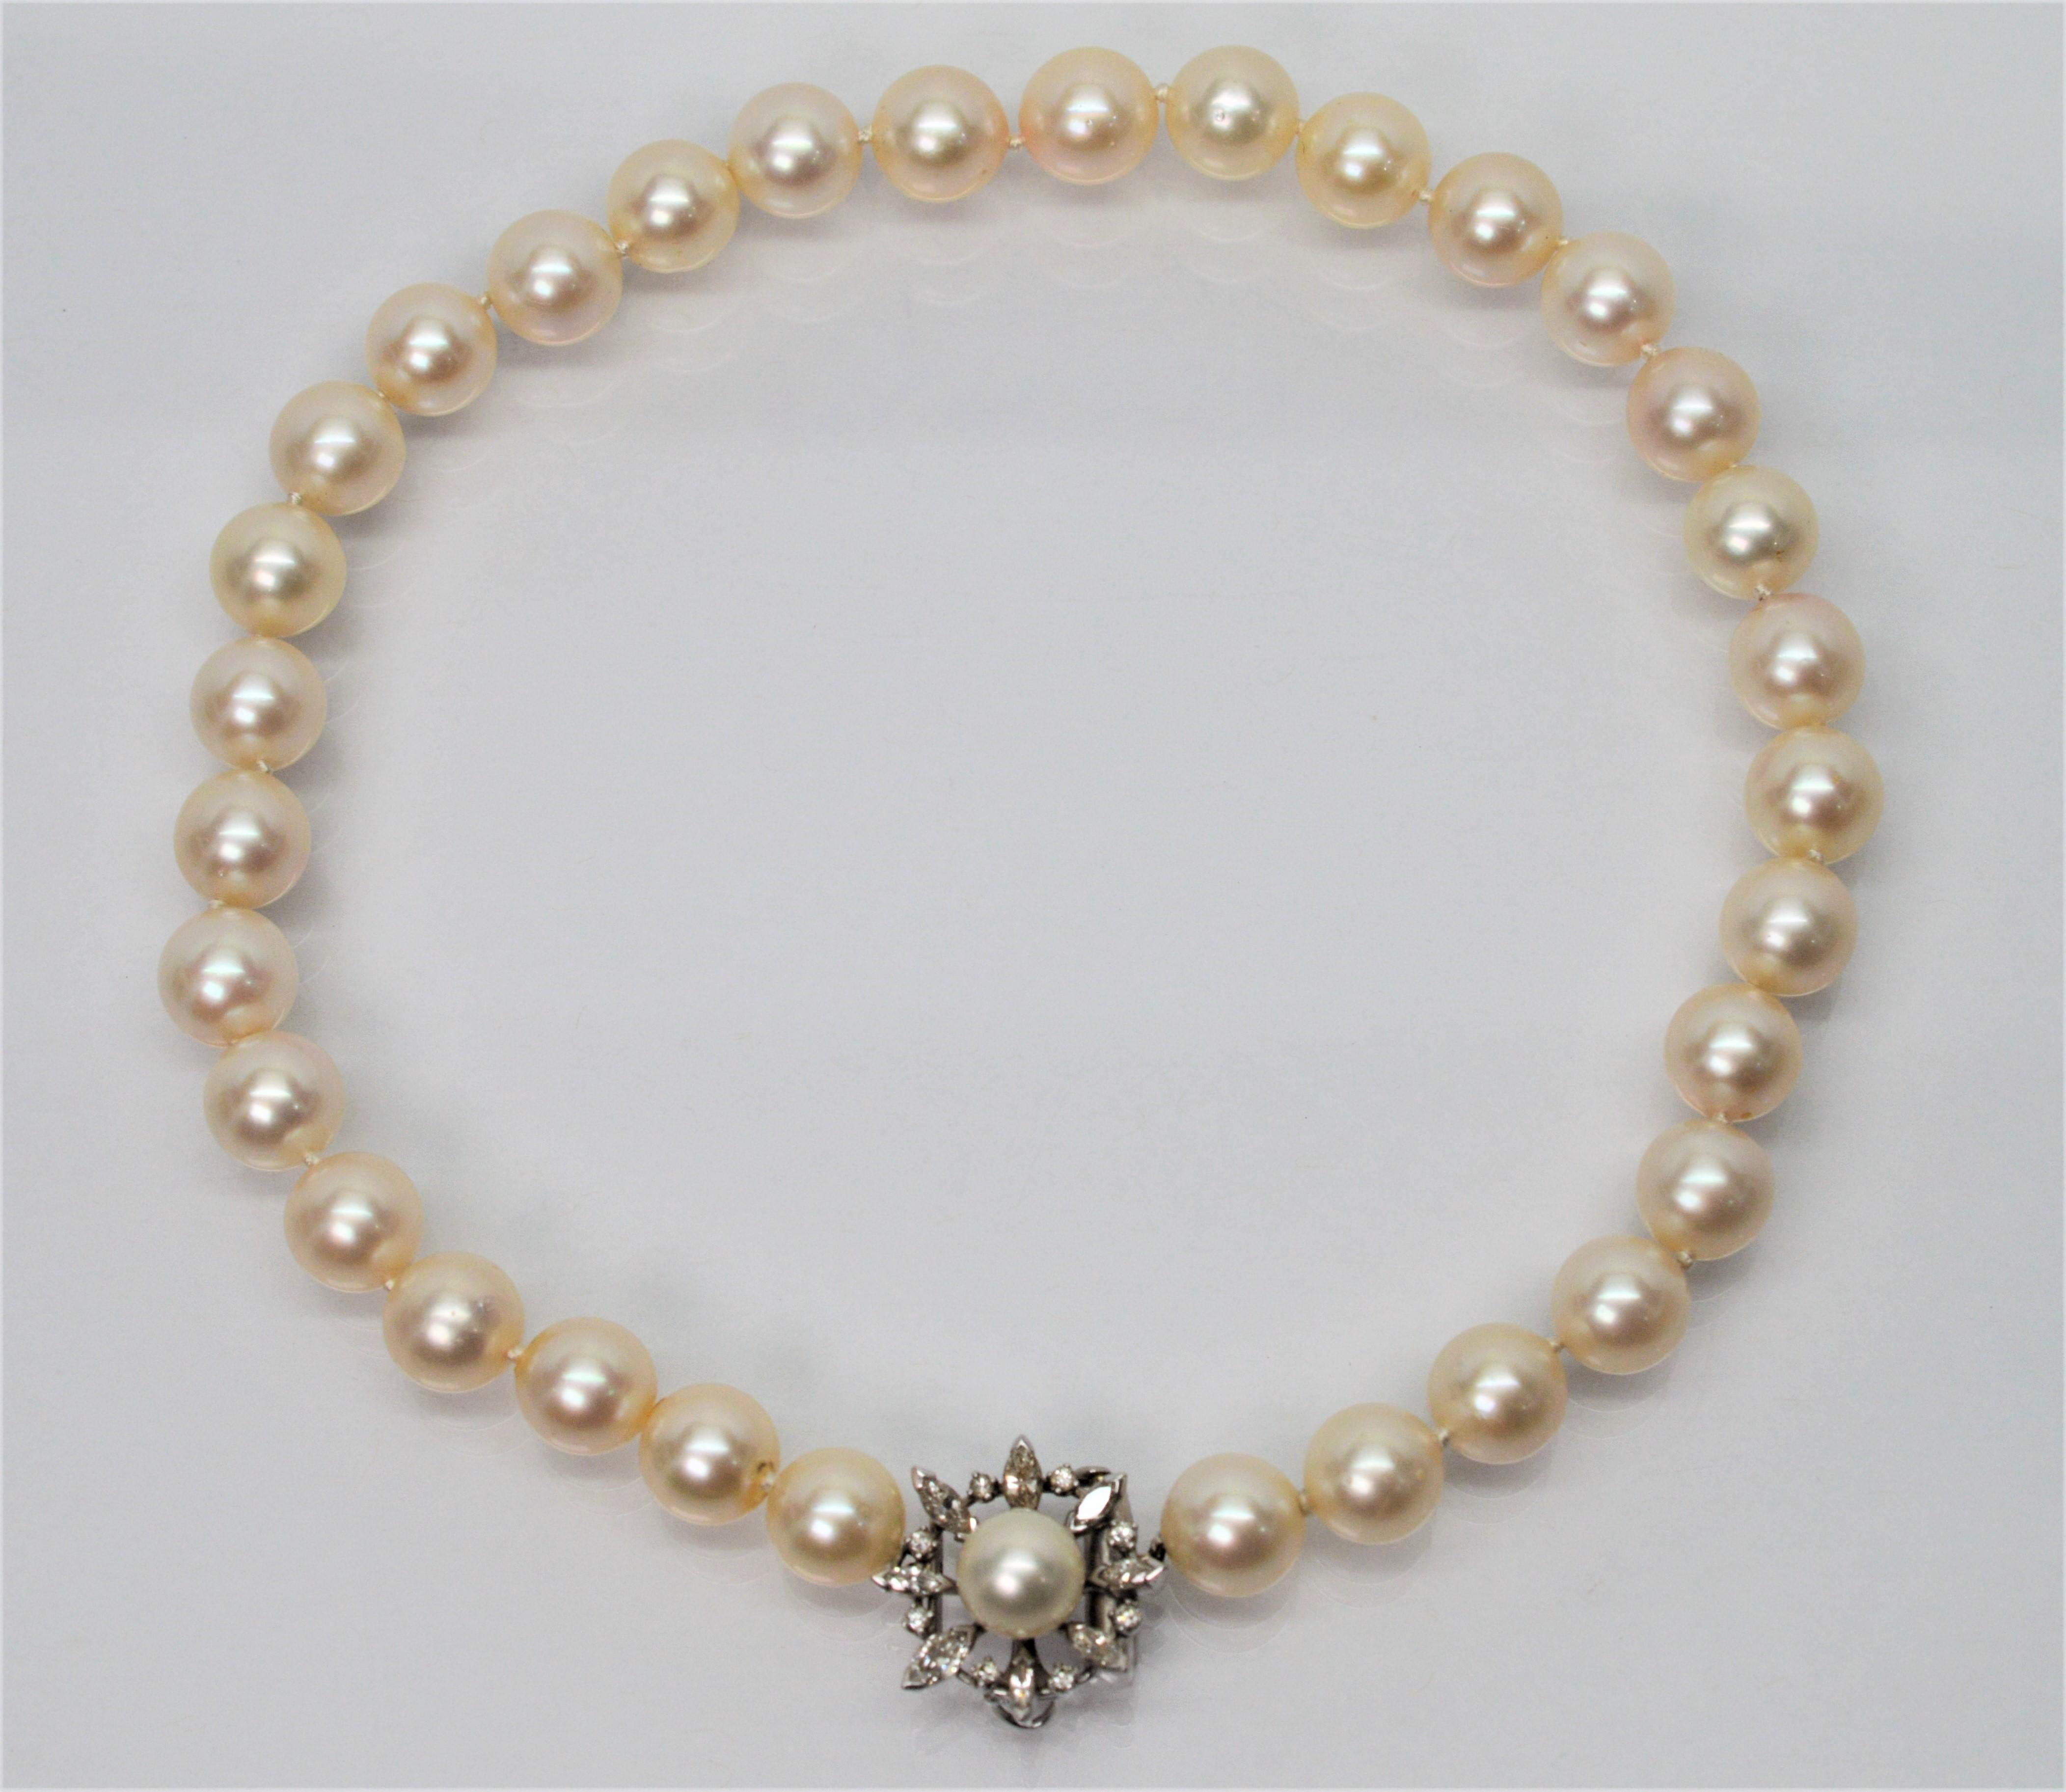 A true period piece, authentic in style that transforms to today. Thirty two natural round 9.5 mm AA Akoya pearls hand strung and knotted display beautifully on this thirteen inch antique choker necklace leading to a splendid diamond platinum floral